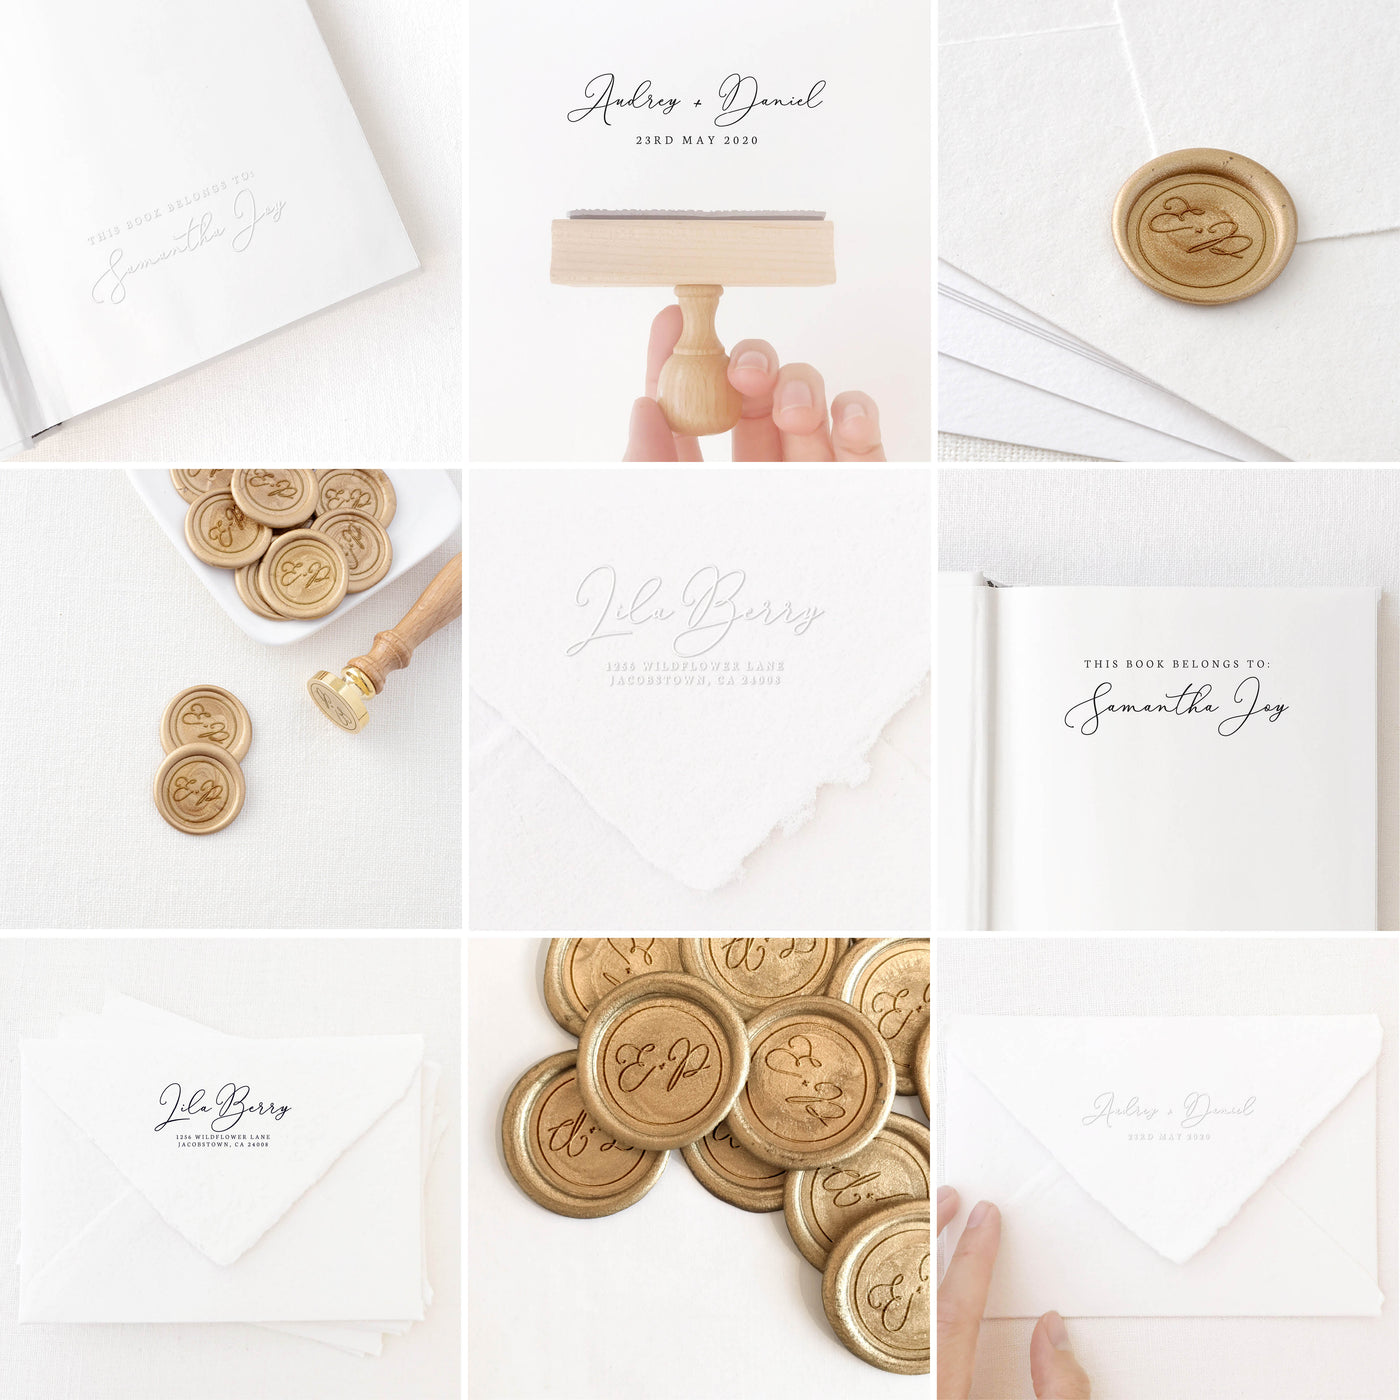 Piper Calligraphy Script Collection | Custom Rubber Stamp, Wax Seal Stickers & Embosser for Custom Luxe Embellishment Packaging & Fine Art Wedding Stationery Invitations | Heirloom Seals